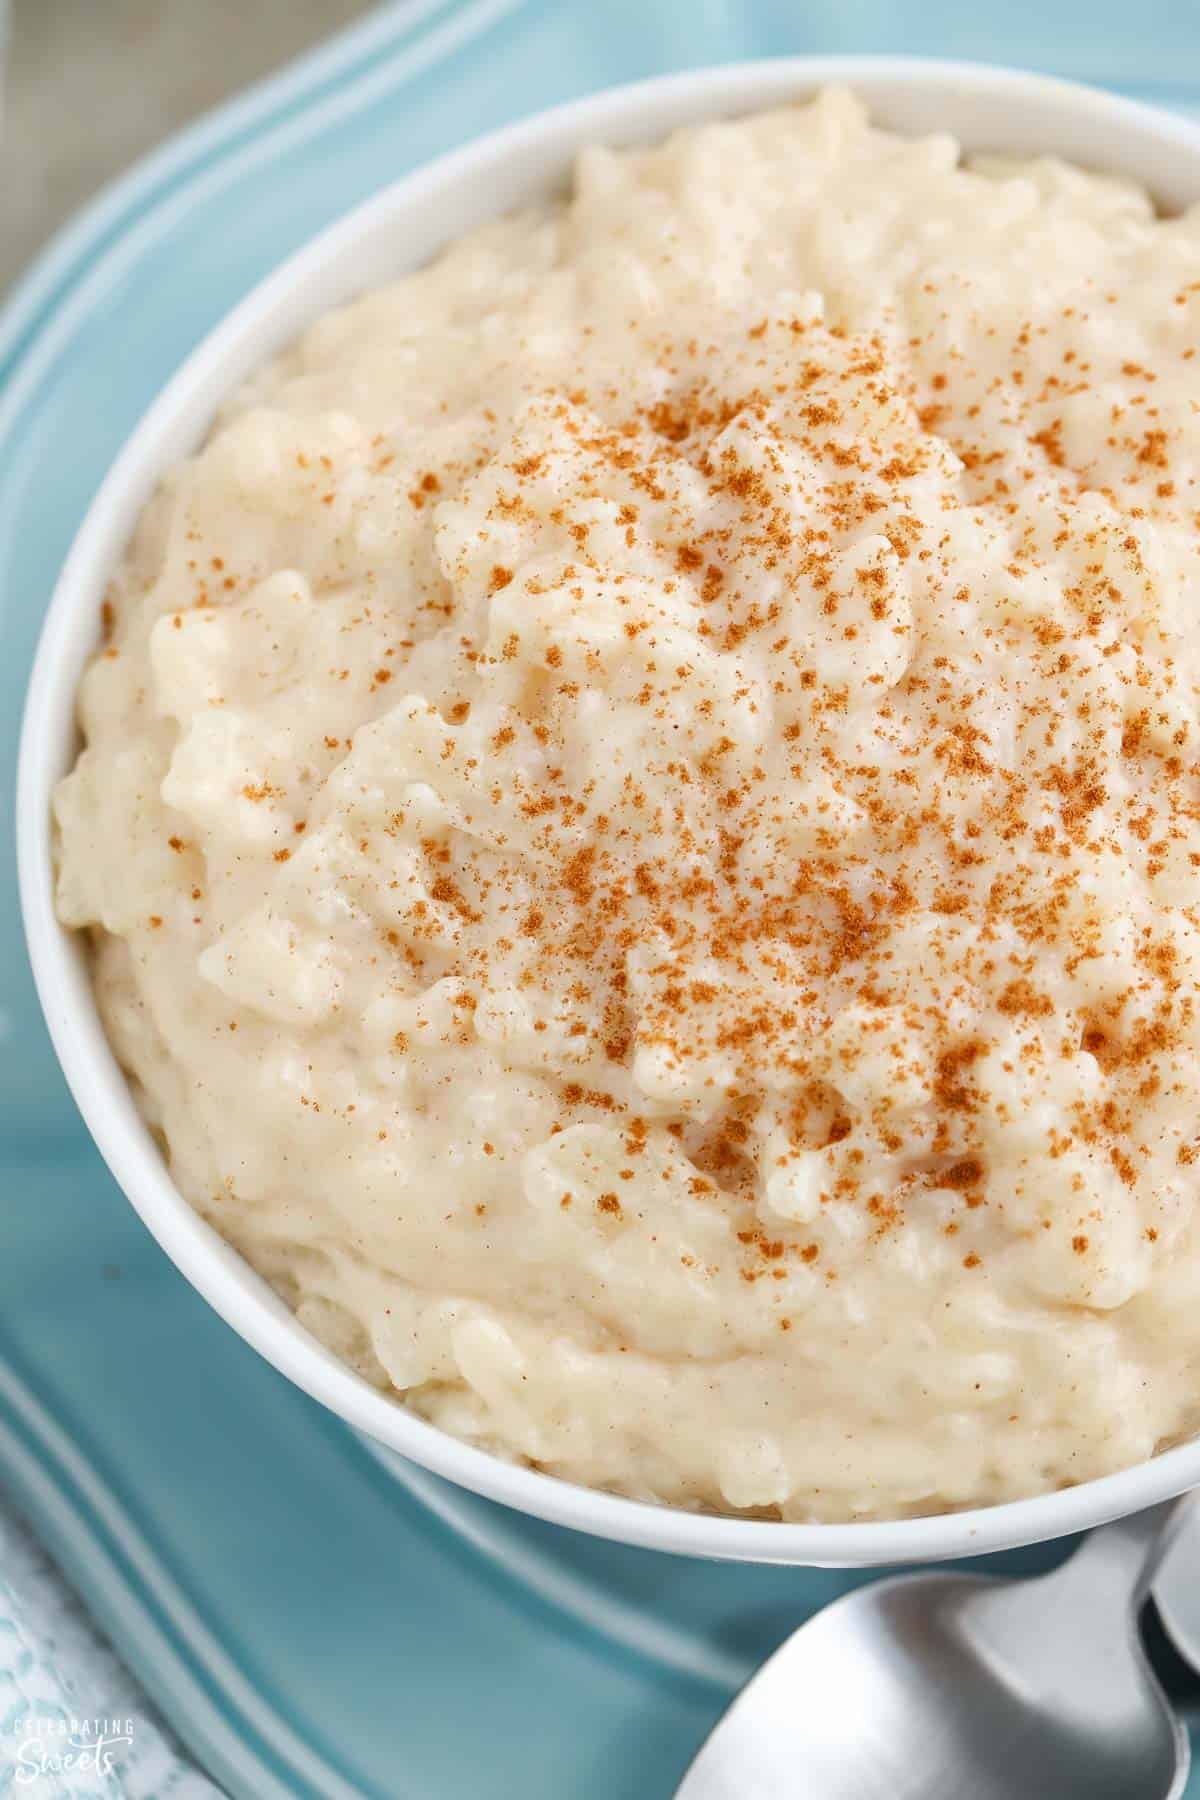 Rice pudding topped with cinnamon in a white bowl.